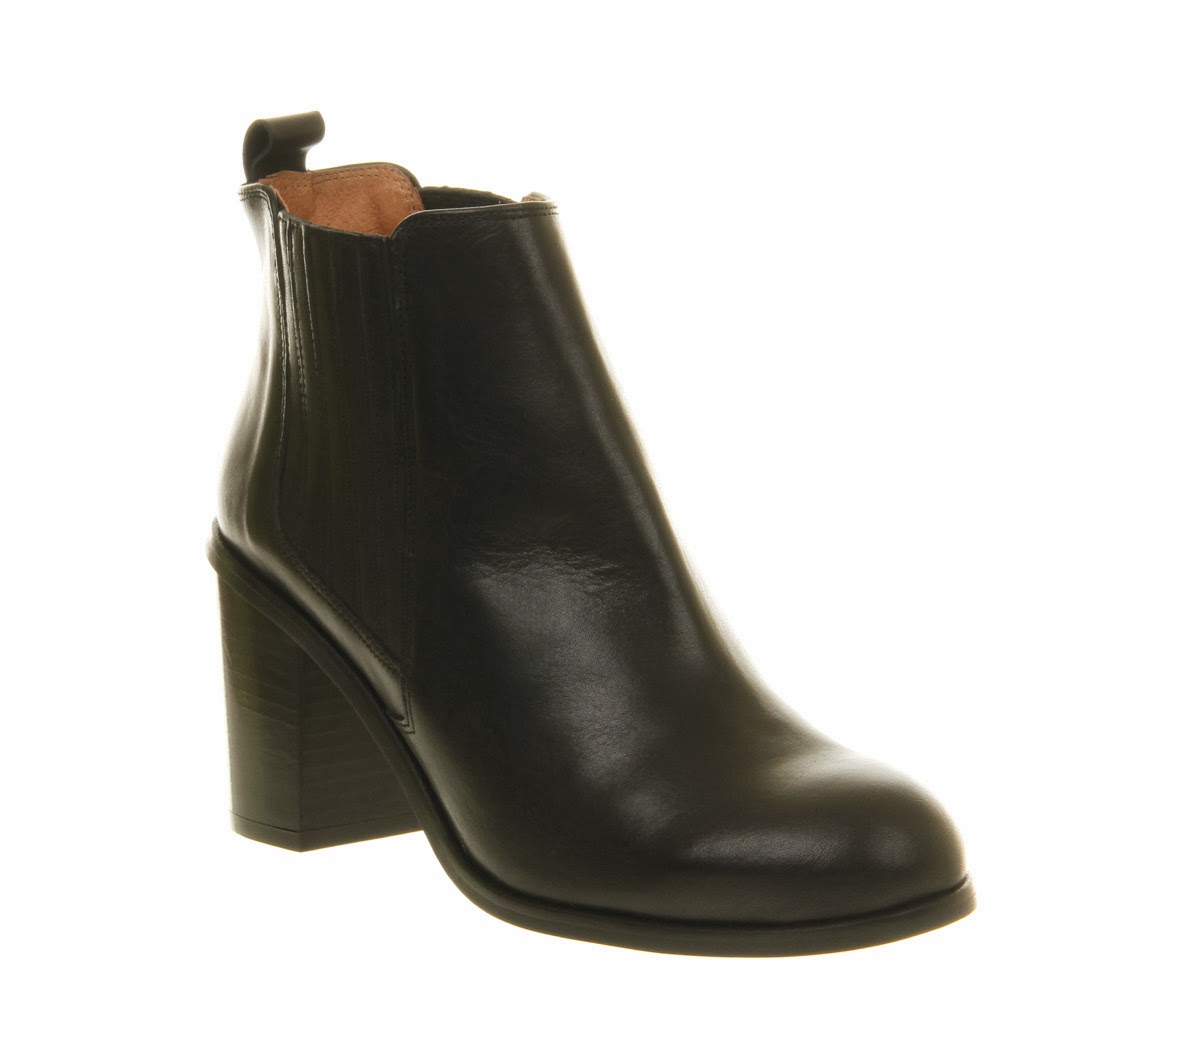 School Run Style: The Black Ankle Boot